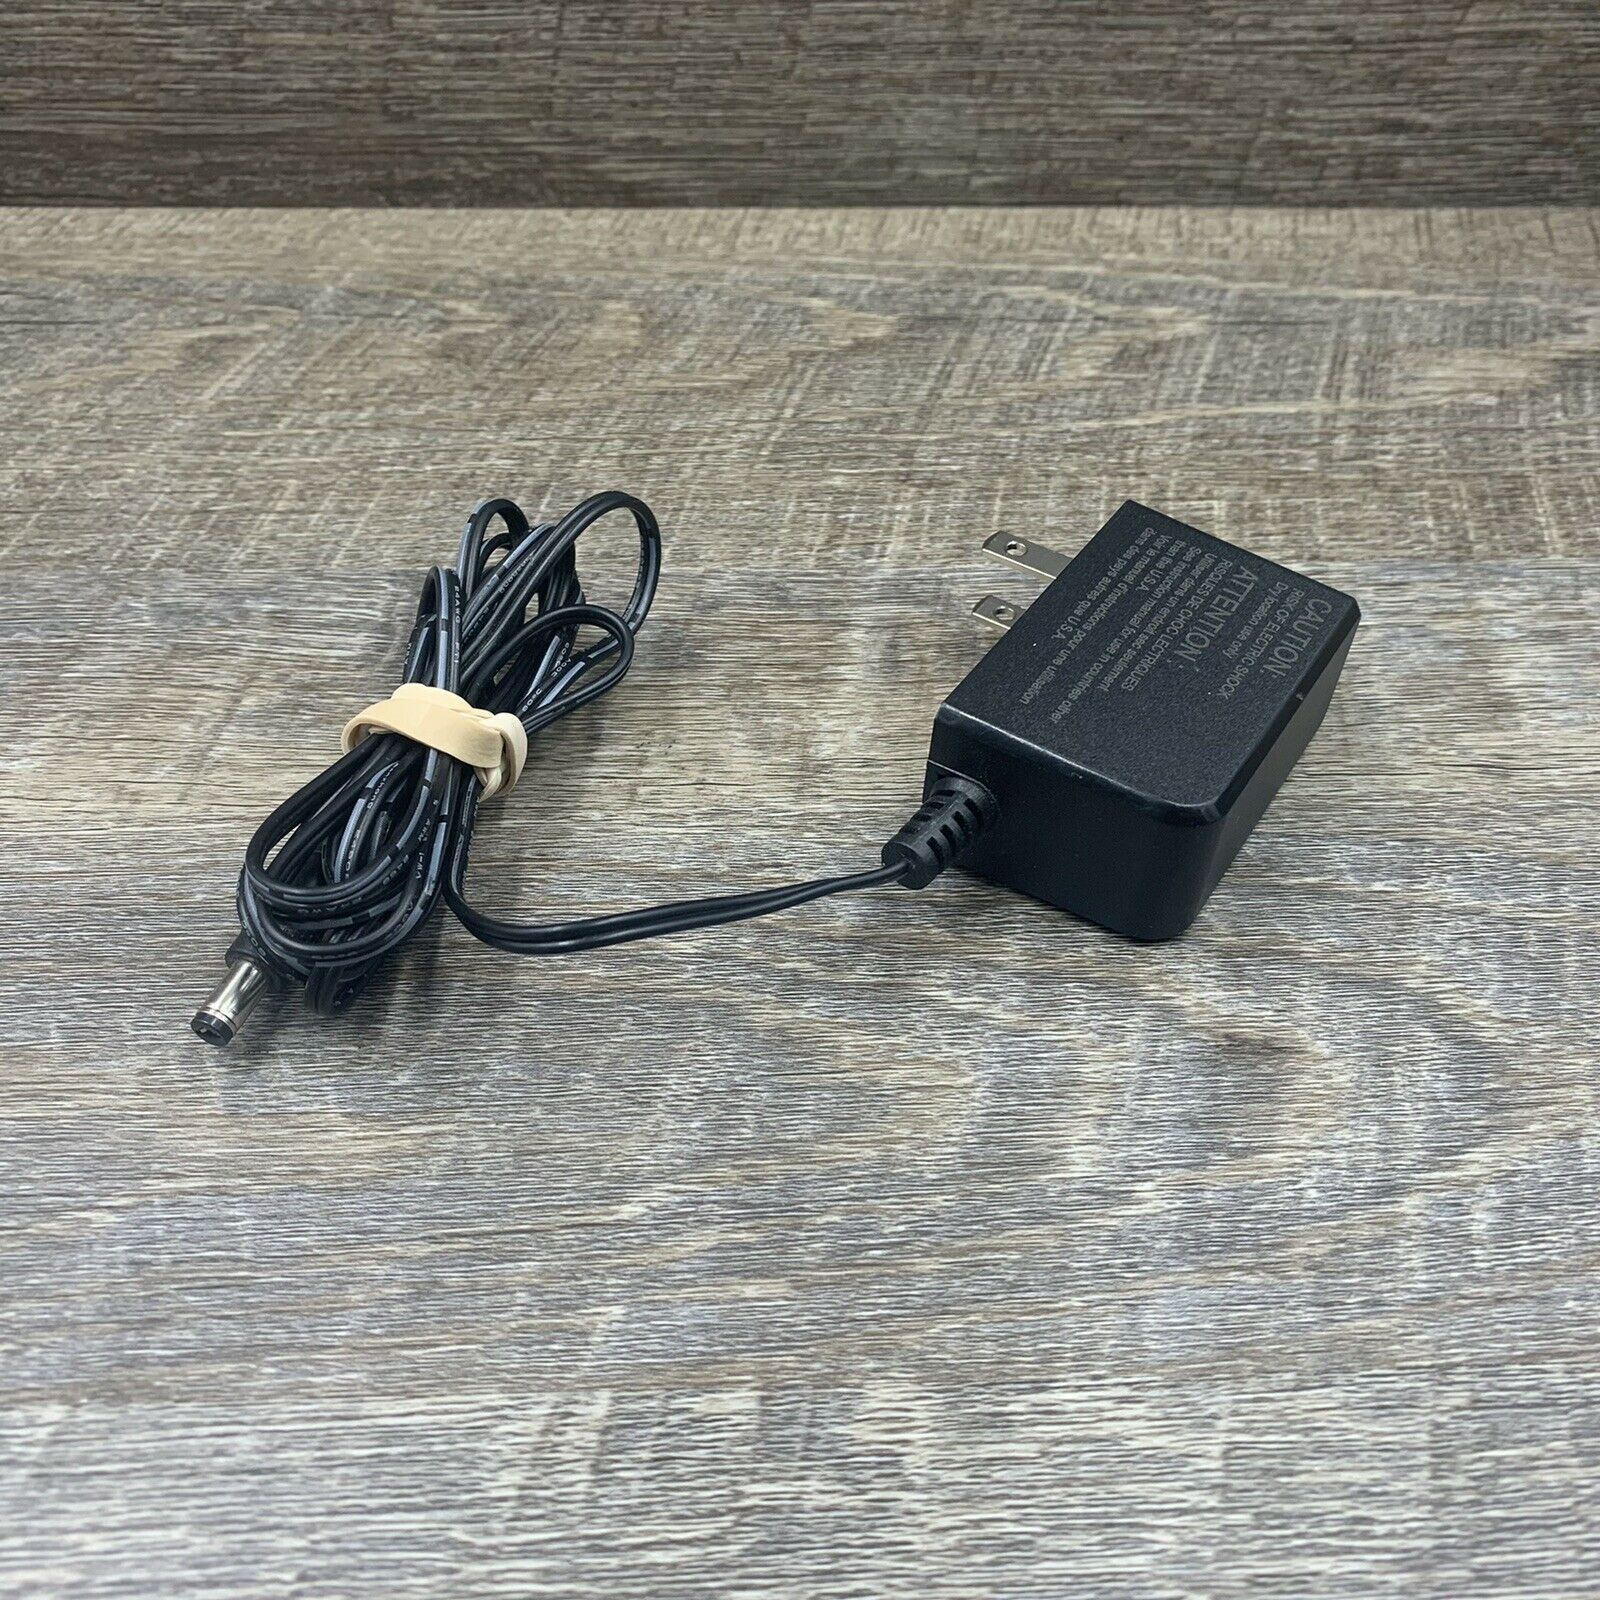 AMC AC Adapter Model AD-0121900060US 19V 0.6A Class 2 Power Supply Country/Region